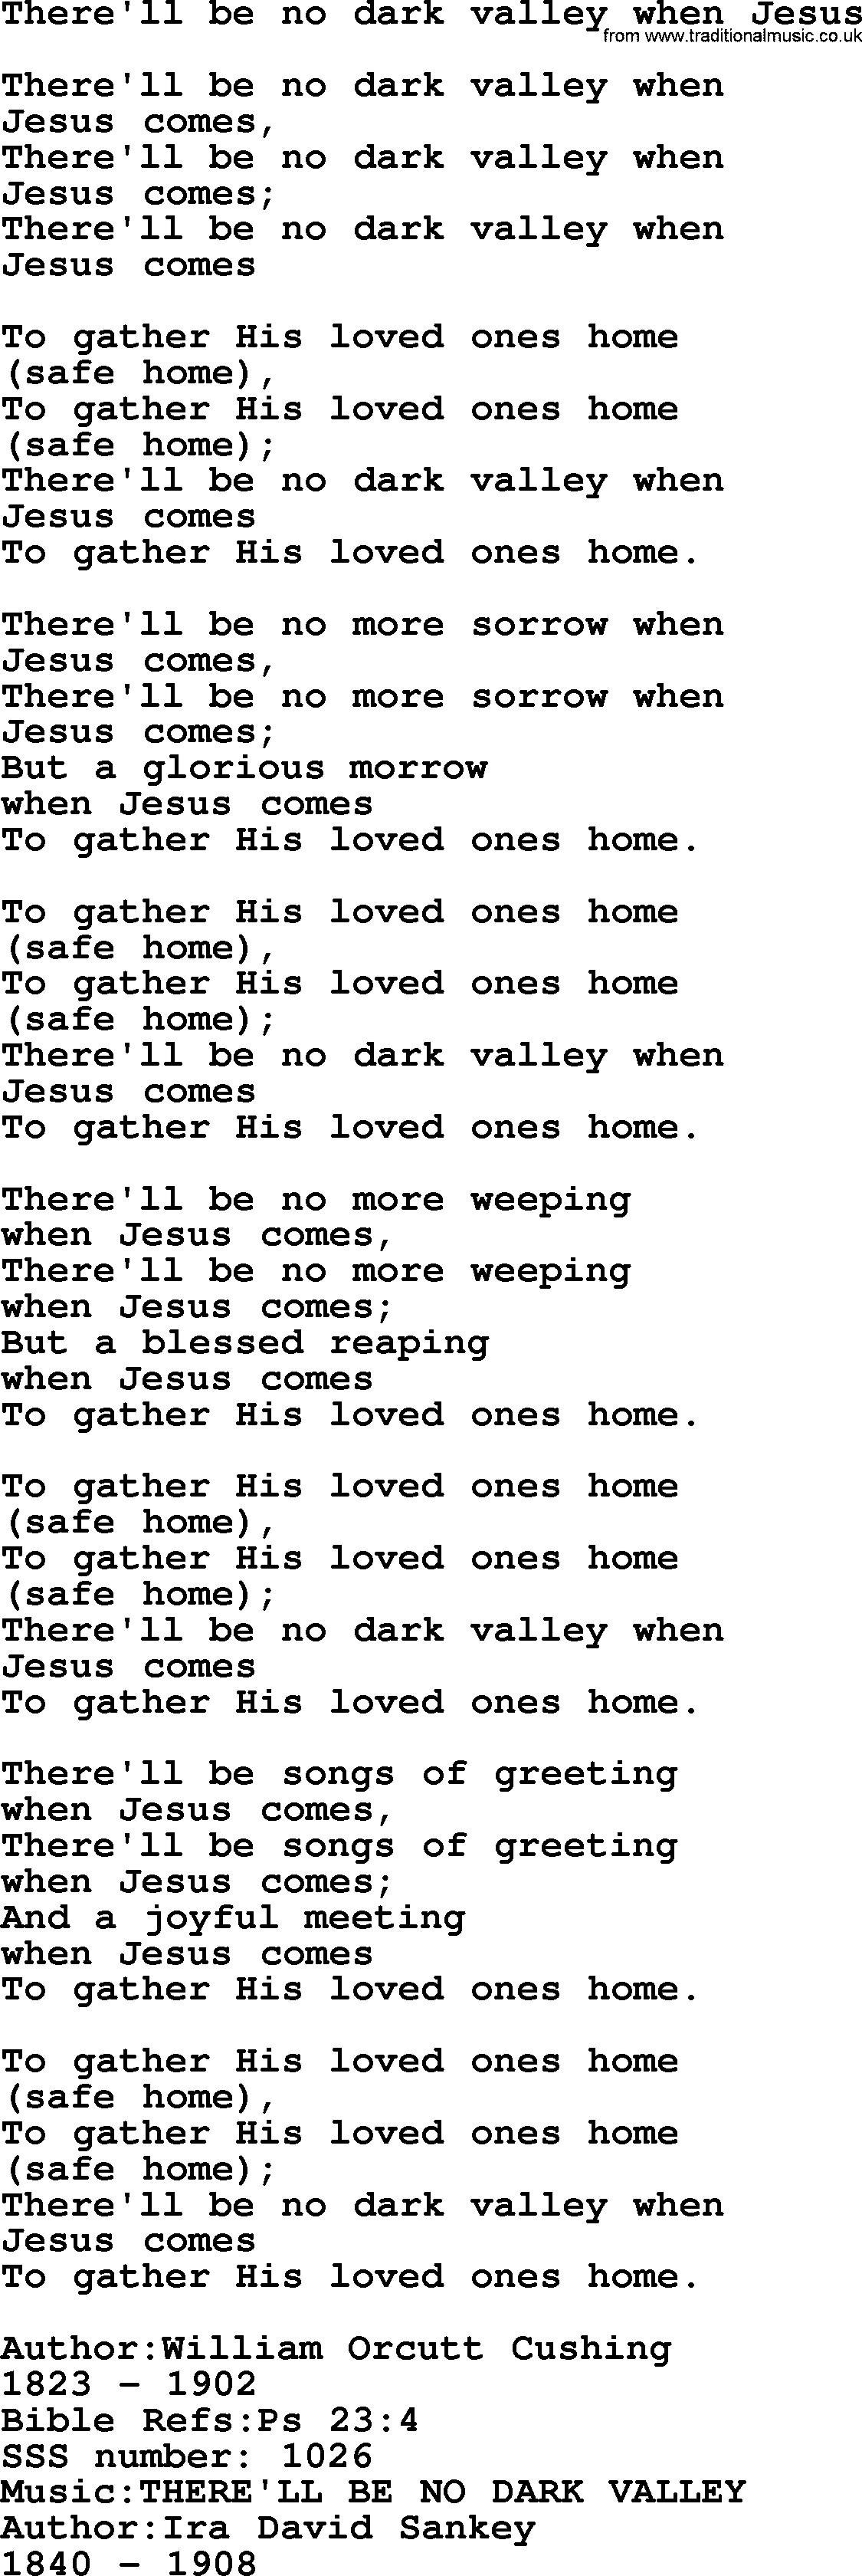 Sacred Songs and Solos complete, 1200 Hymns, title: There'll Be No Dark Valley When Jesus, lyrics and PDF